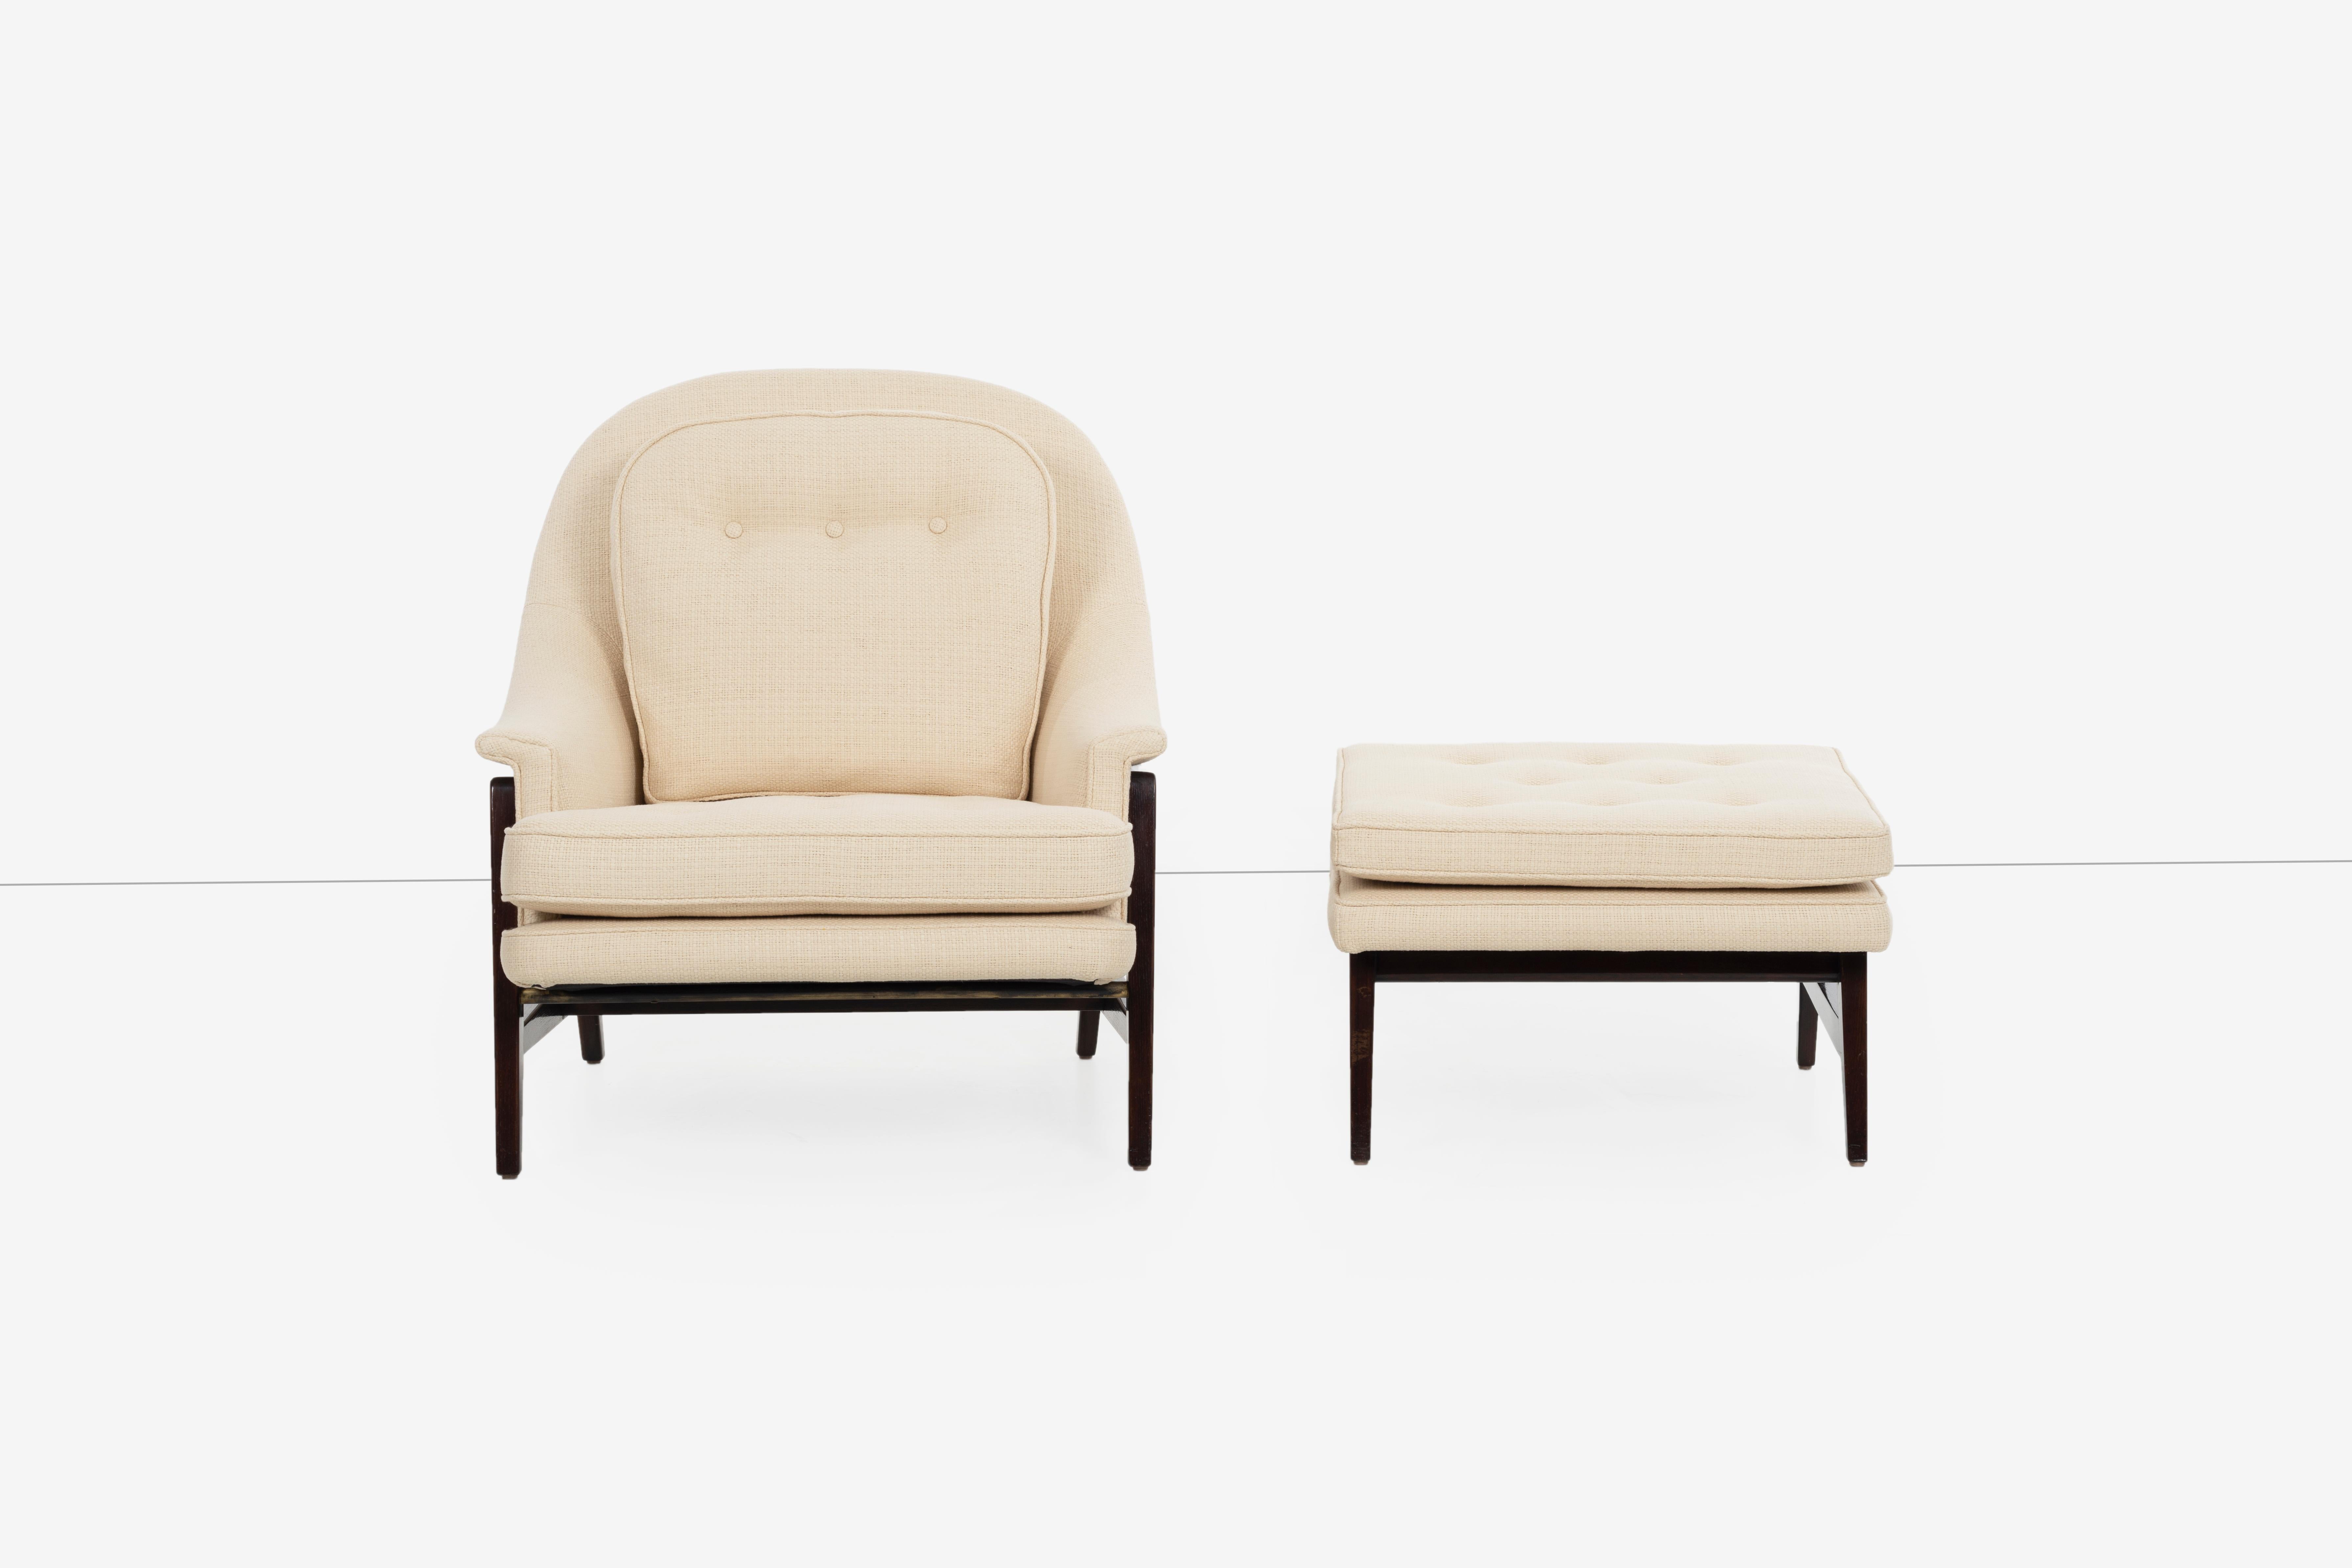 North American Edward Wormley Lounge Chair and Ottoman for Dunbar